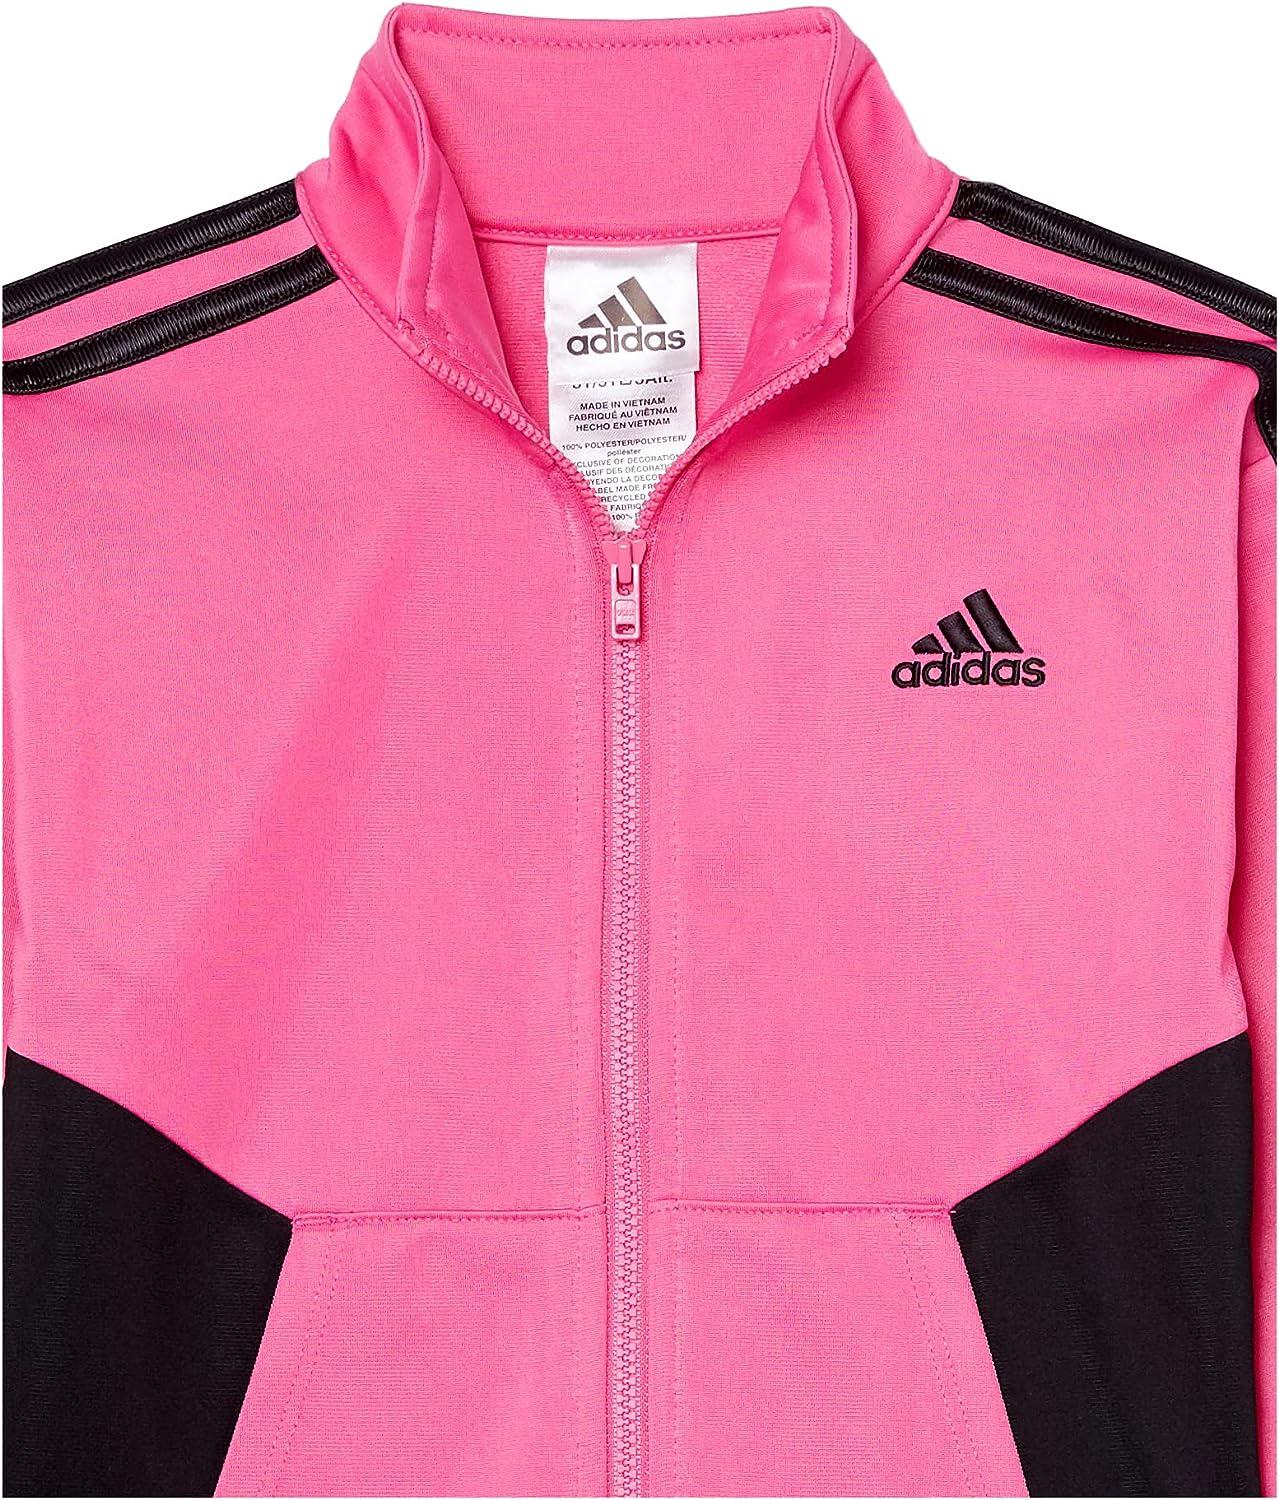 adidas Little Girls Full Zip Jacket & Joggers Outfit Set Size 4